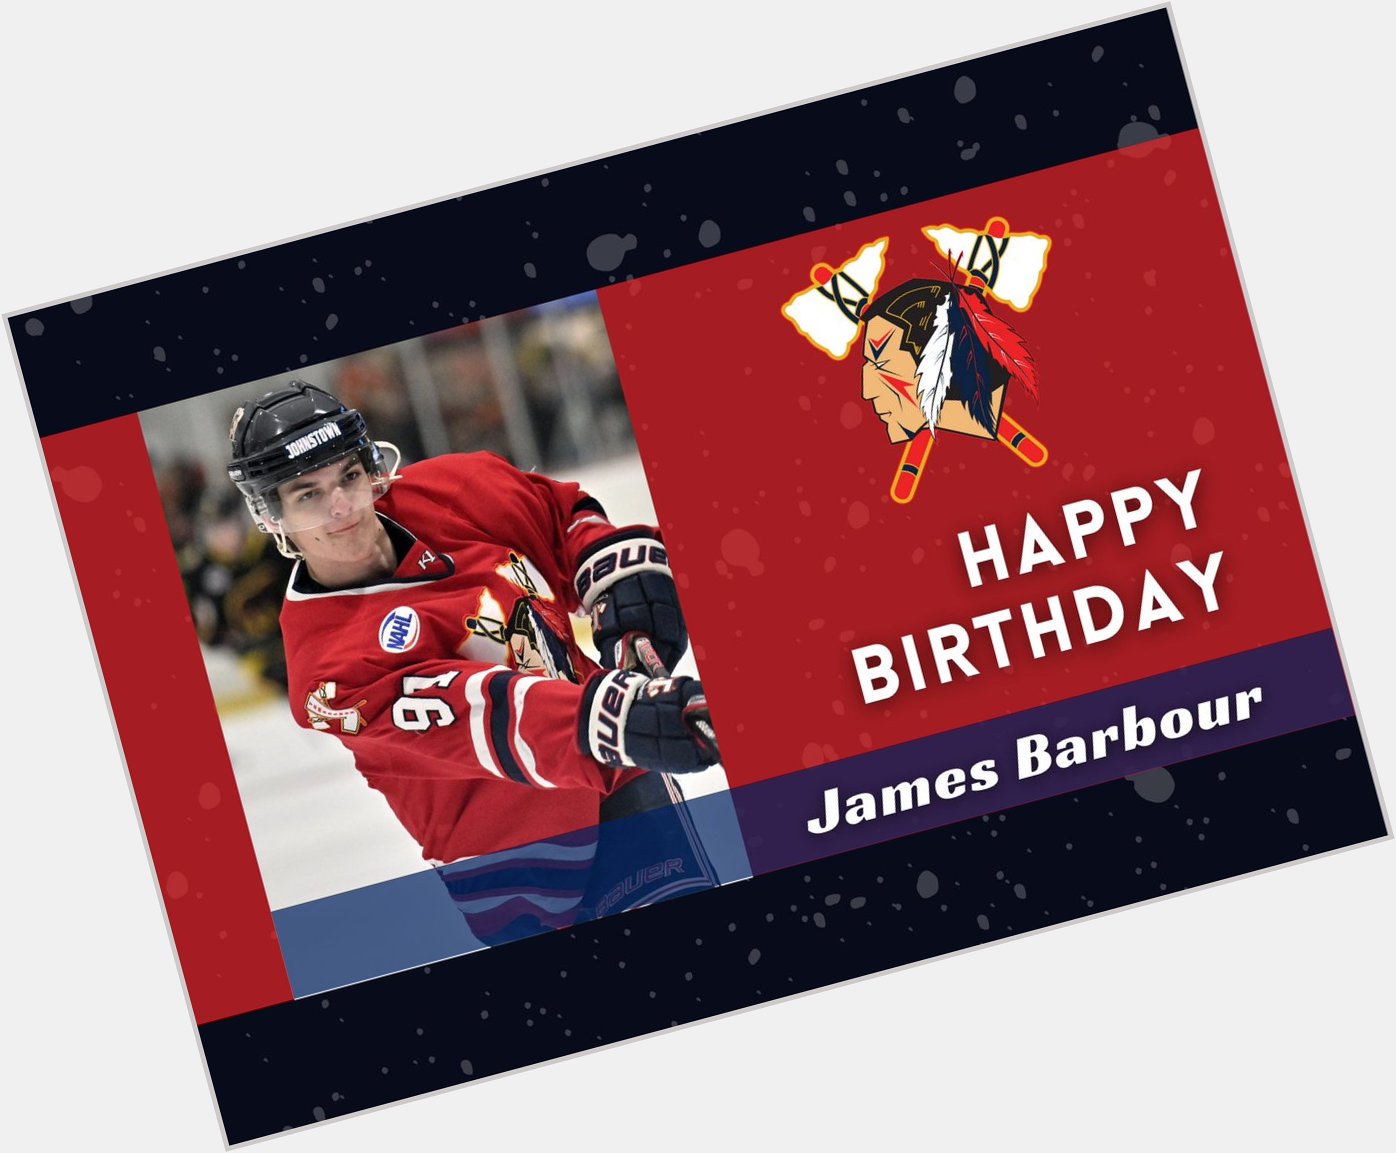 Join us in wishing a happy 21st birthday to Tomahawks forward James Barbour! 